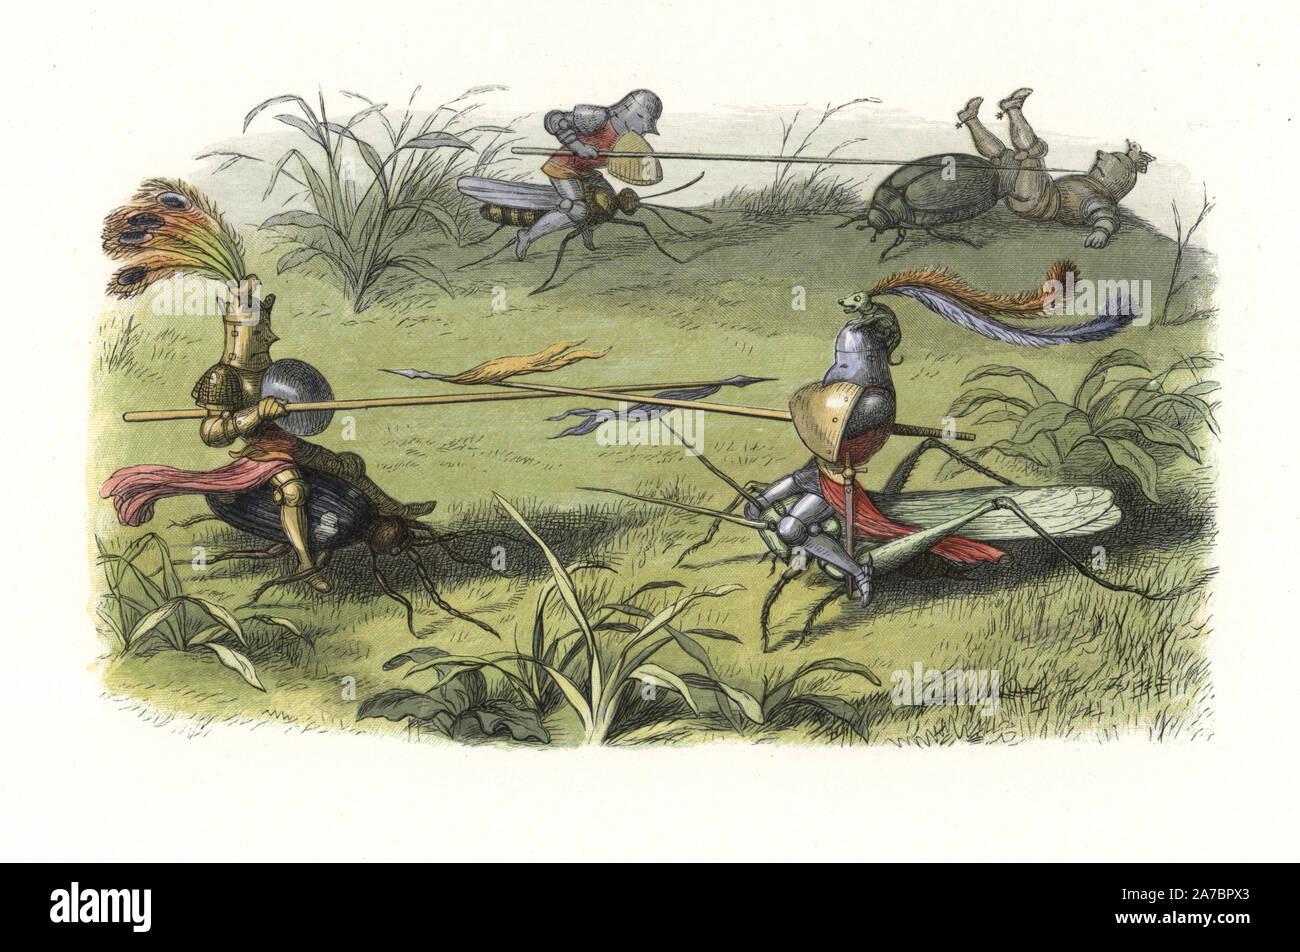 Elves in suits of armour mounted on crickets and beetles staging a fairy tournament. Handcoloured woodblock print by Edmund Evans after an illustration by Richard Doyle from In Fairyland, a series of Pictures from the Elf World, Longman, London, 1870. Stock Photo